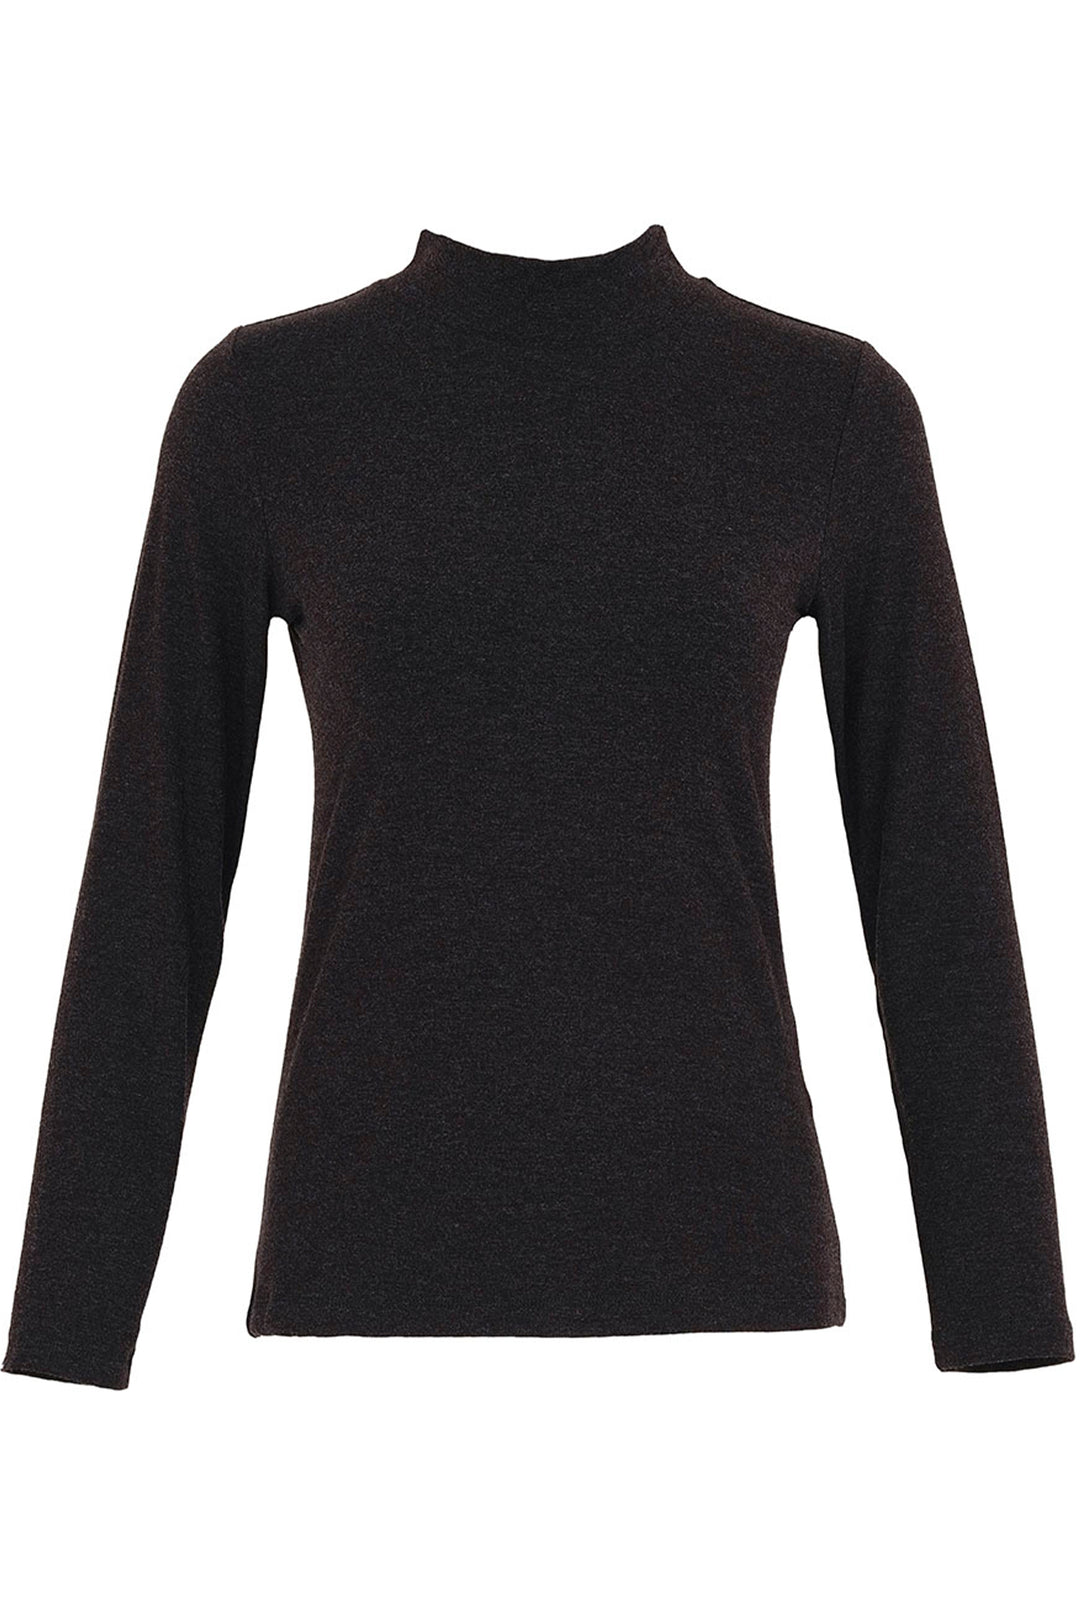 Its simple yet elegant mock neck makes it a perfect piece for layering or wearing as a basic top indoors.